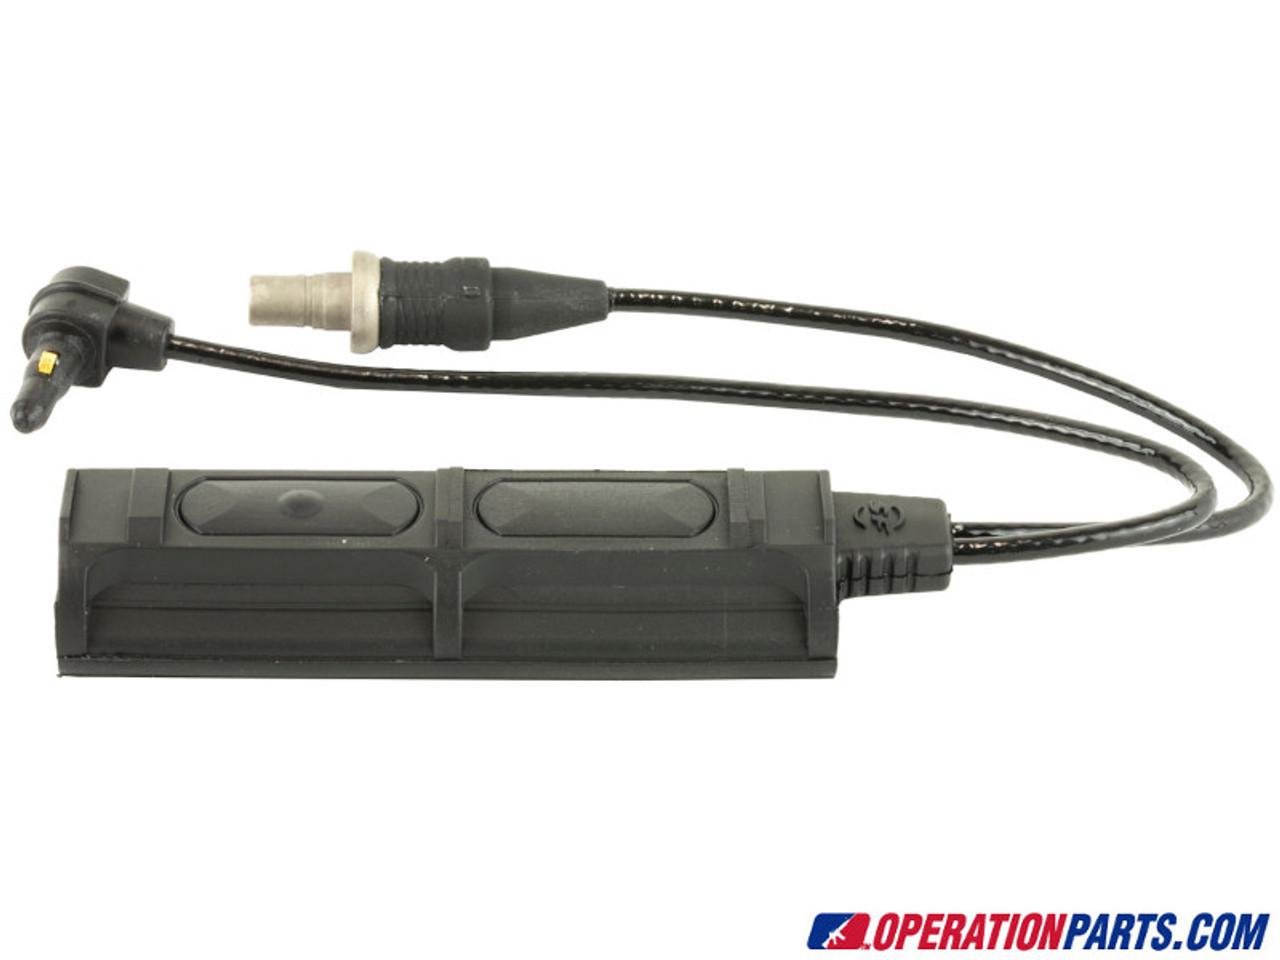 Surefire Remote Dual Switch for Weaponlights, ATPIAL Laser Device, 7